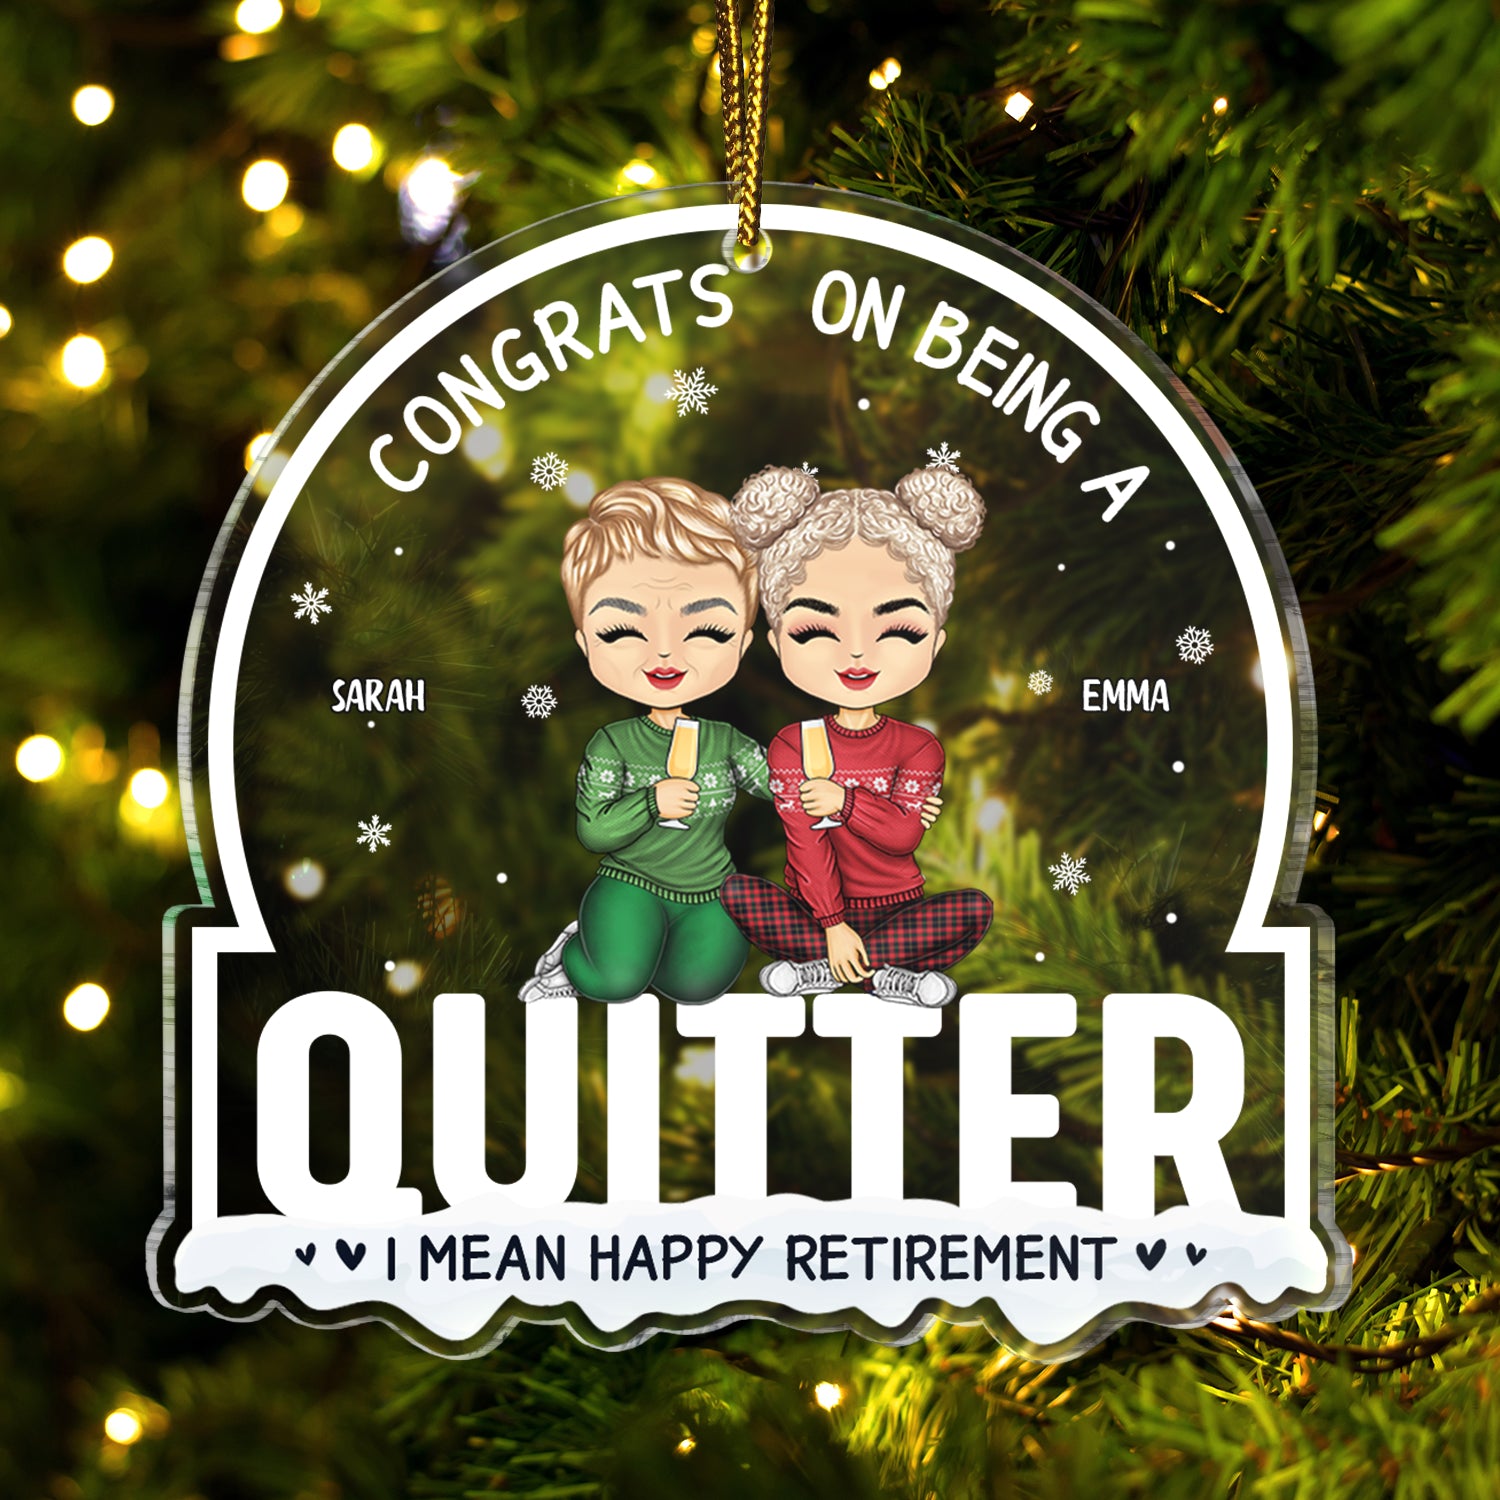 Christmas Congrats On Being A Quiter - Retirement Gift For Colleagues - Personalized Custom Shaped Acrylic Ornament